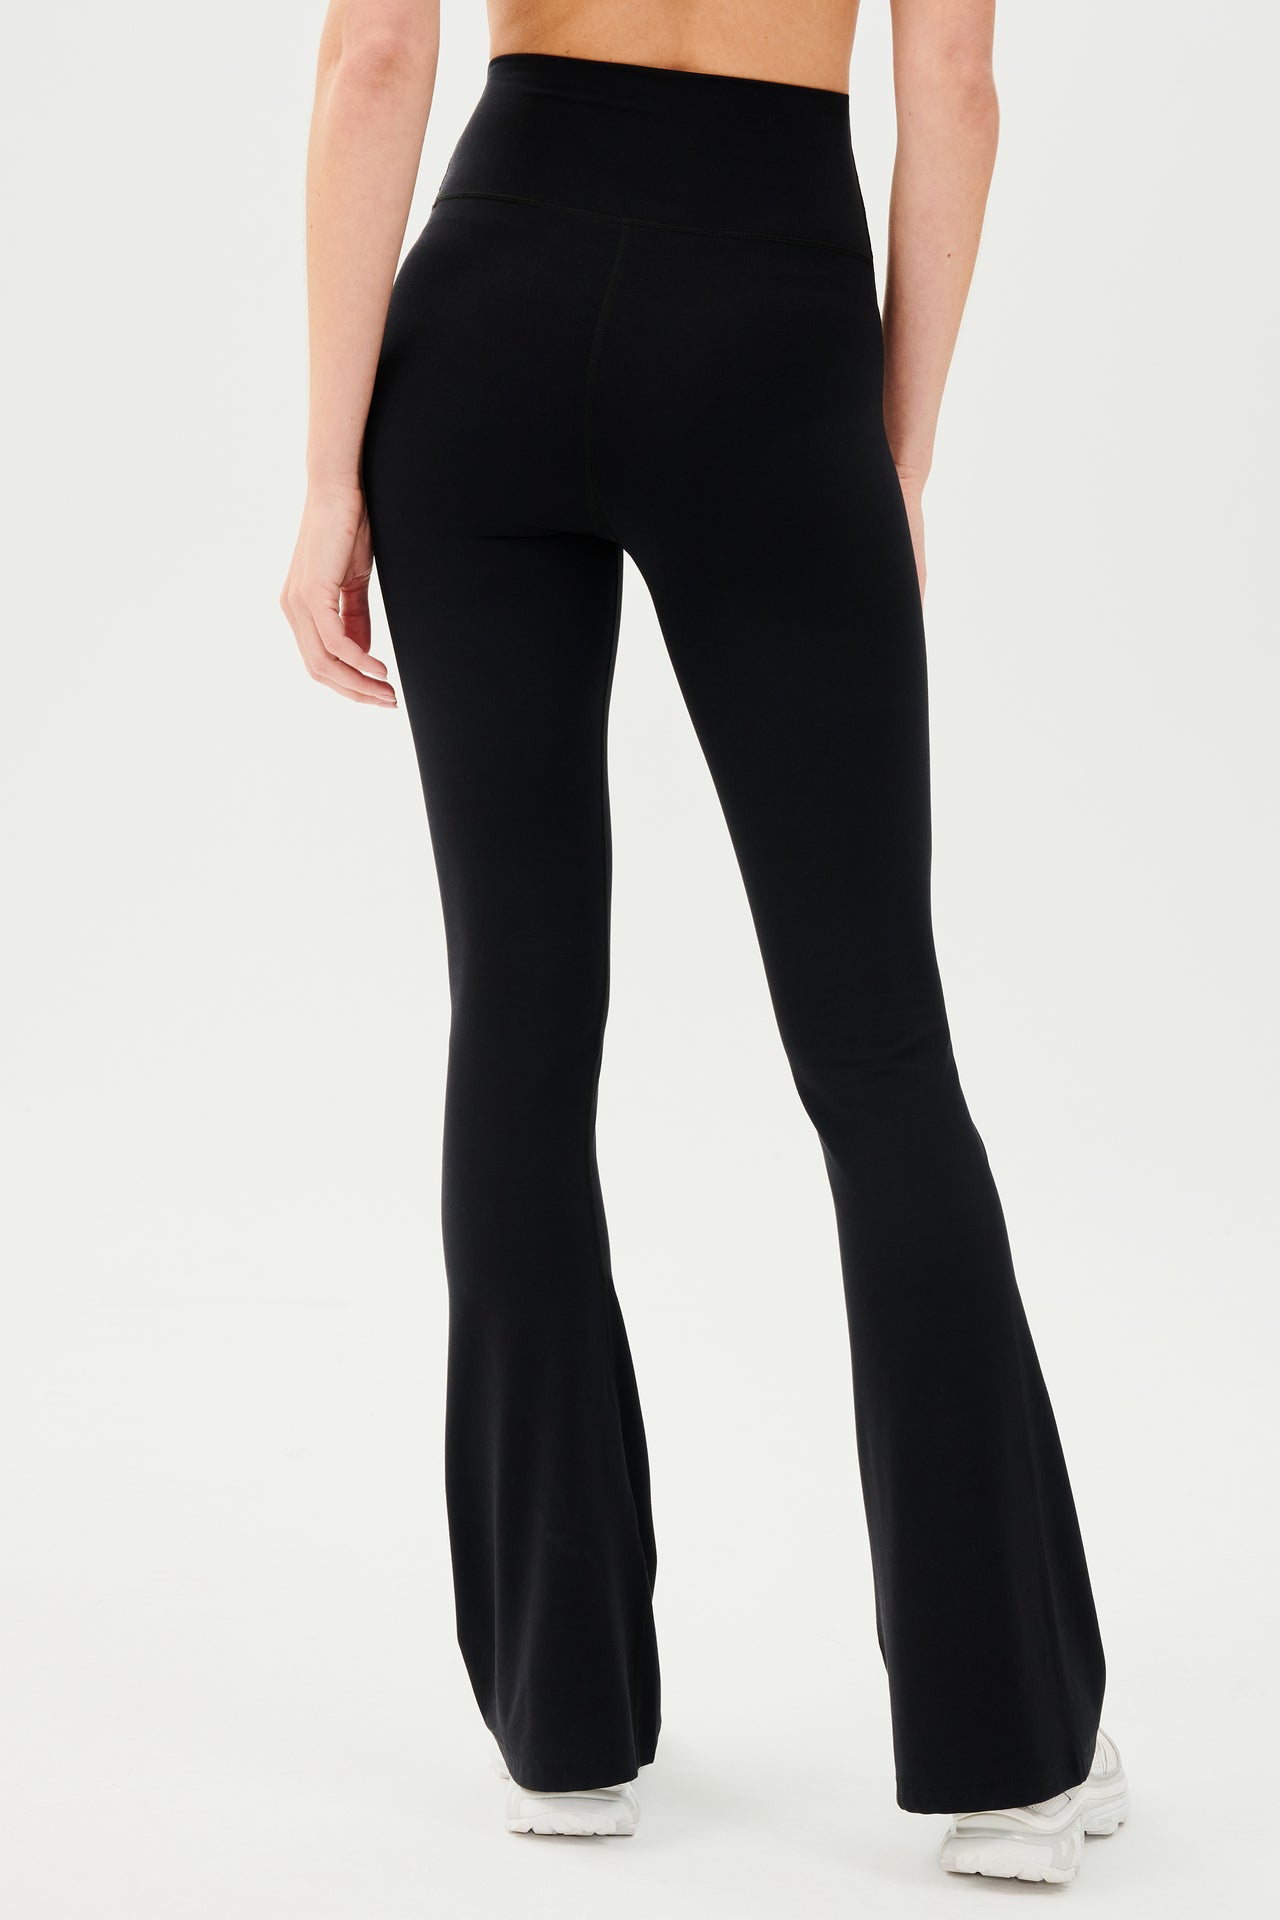 The back view of a woman wearing SPLITS59's Raquel High Waist Airweight Flare - Black leggings.